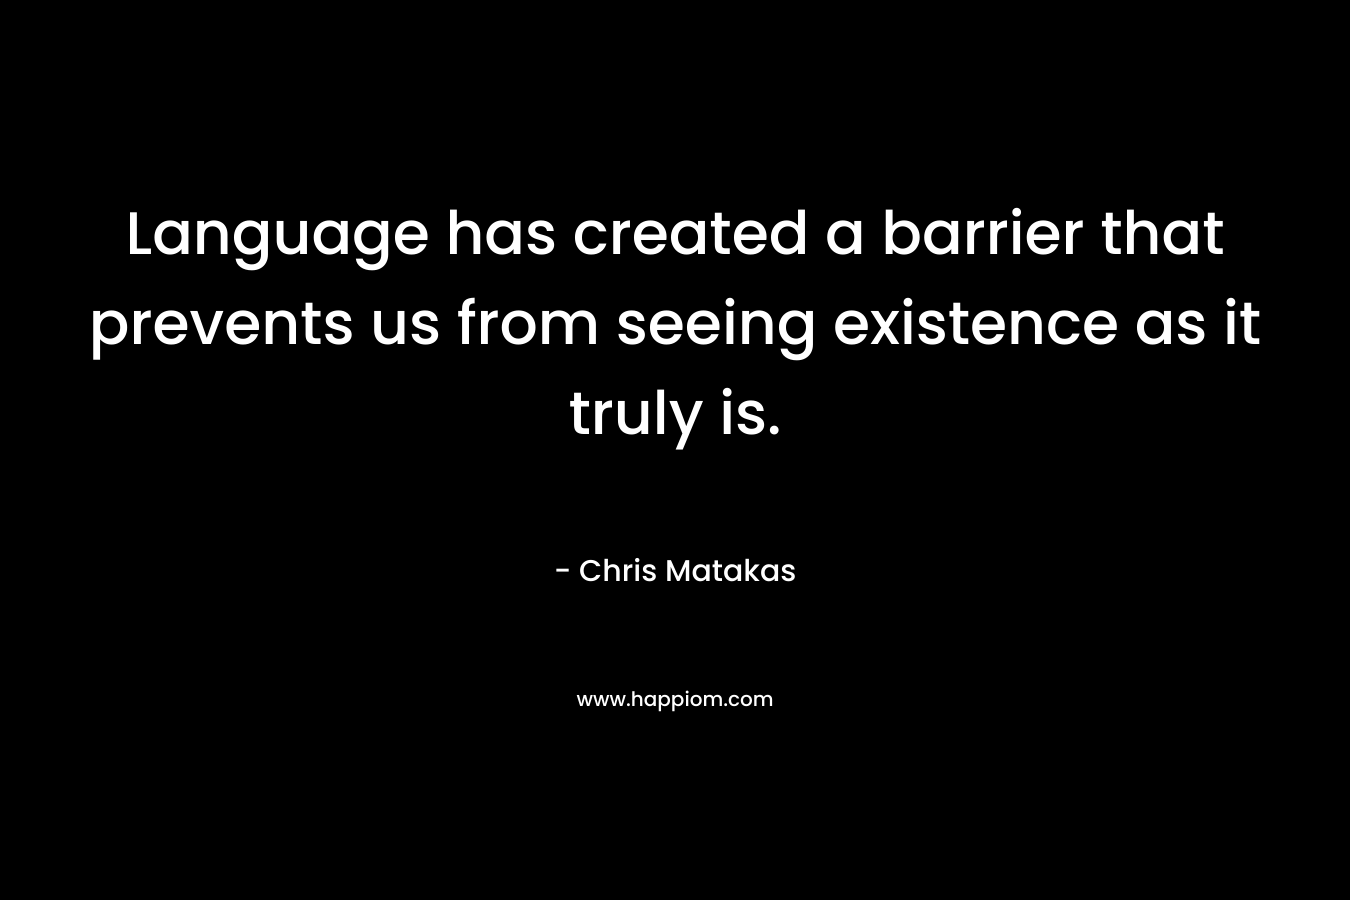 Language has created a barrier that prevents us from seeing existence as it truly is.